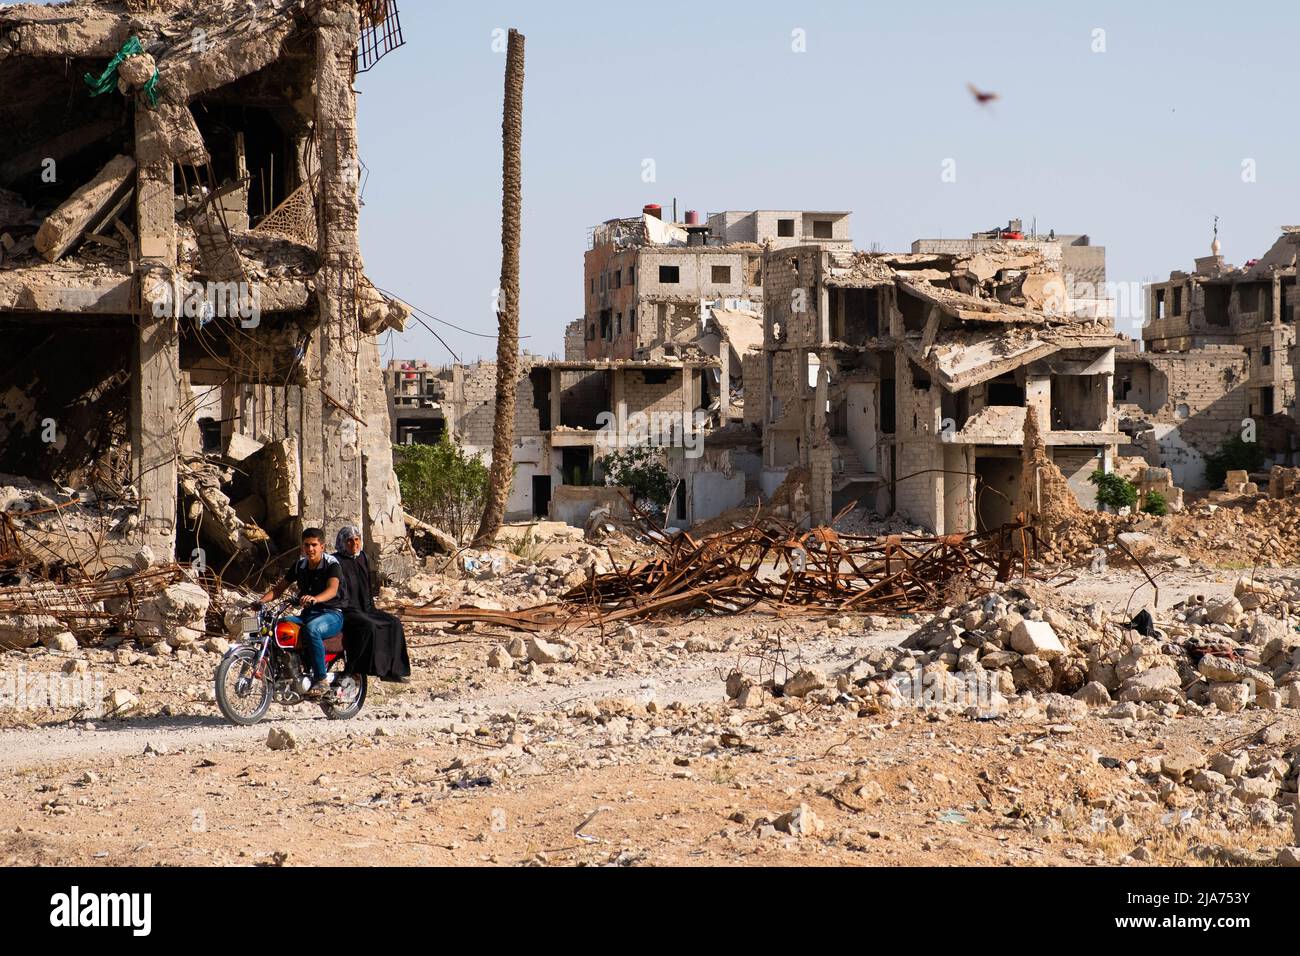 Darayya, Syria - April, 2022: People in destroyed city of Darayya after the Syrian Civil War. Stock Photo